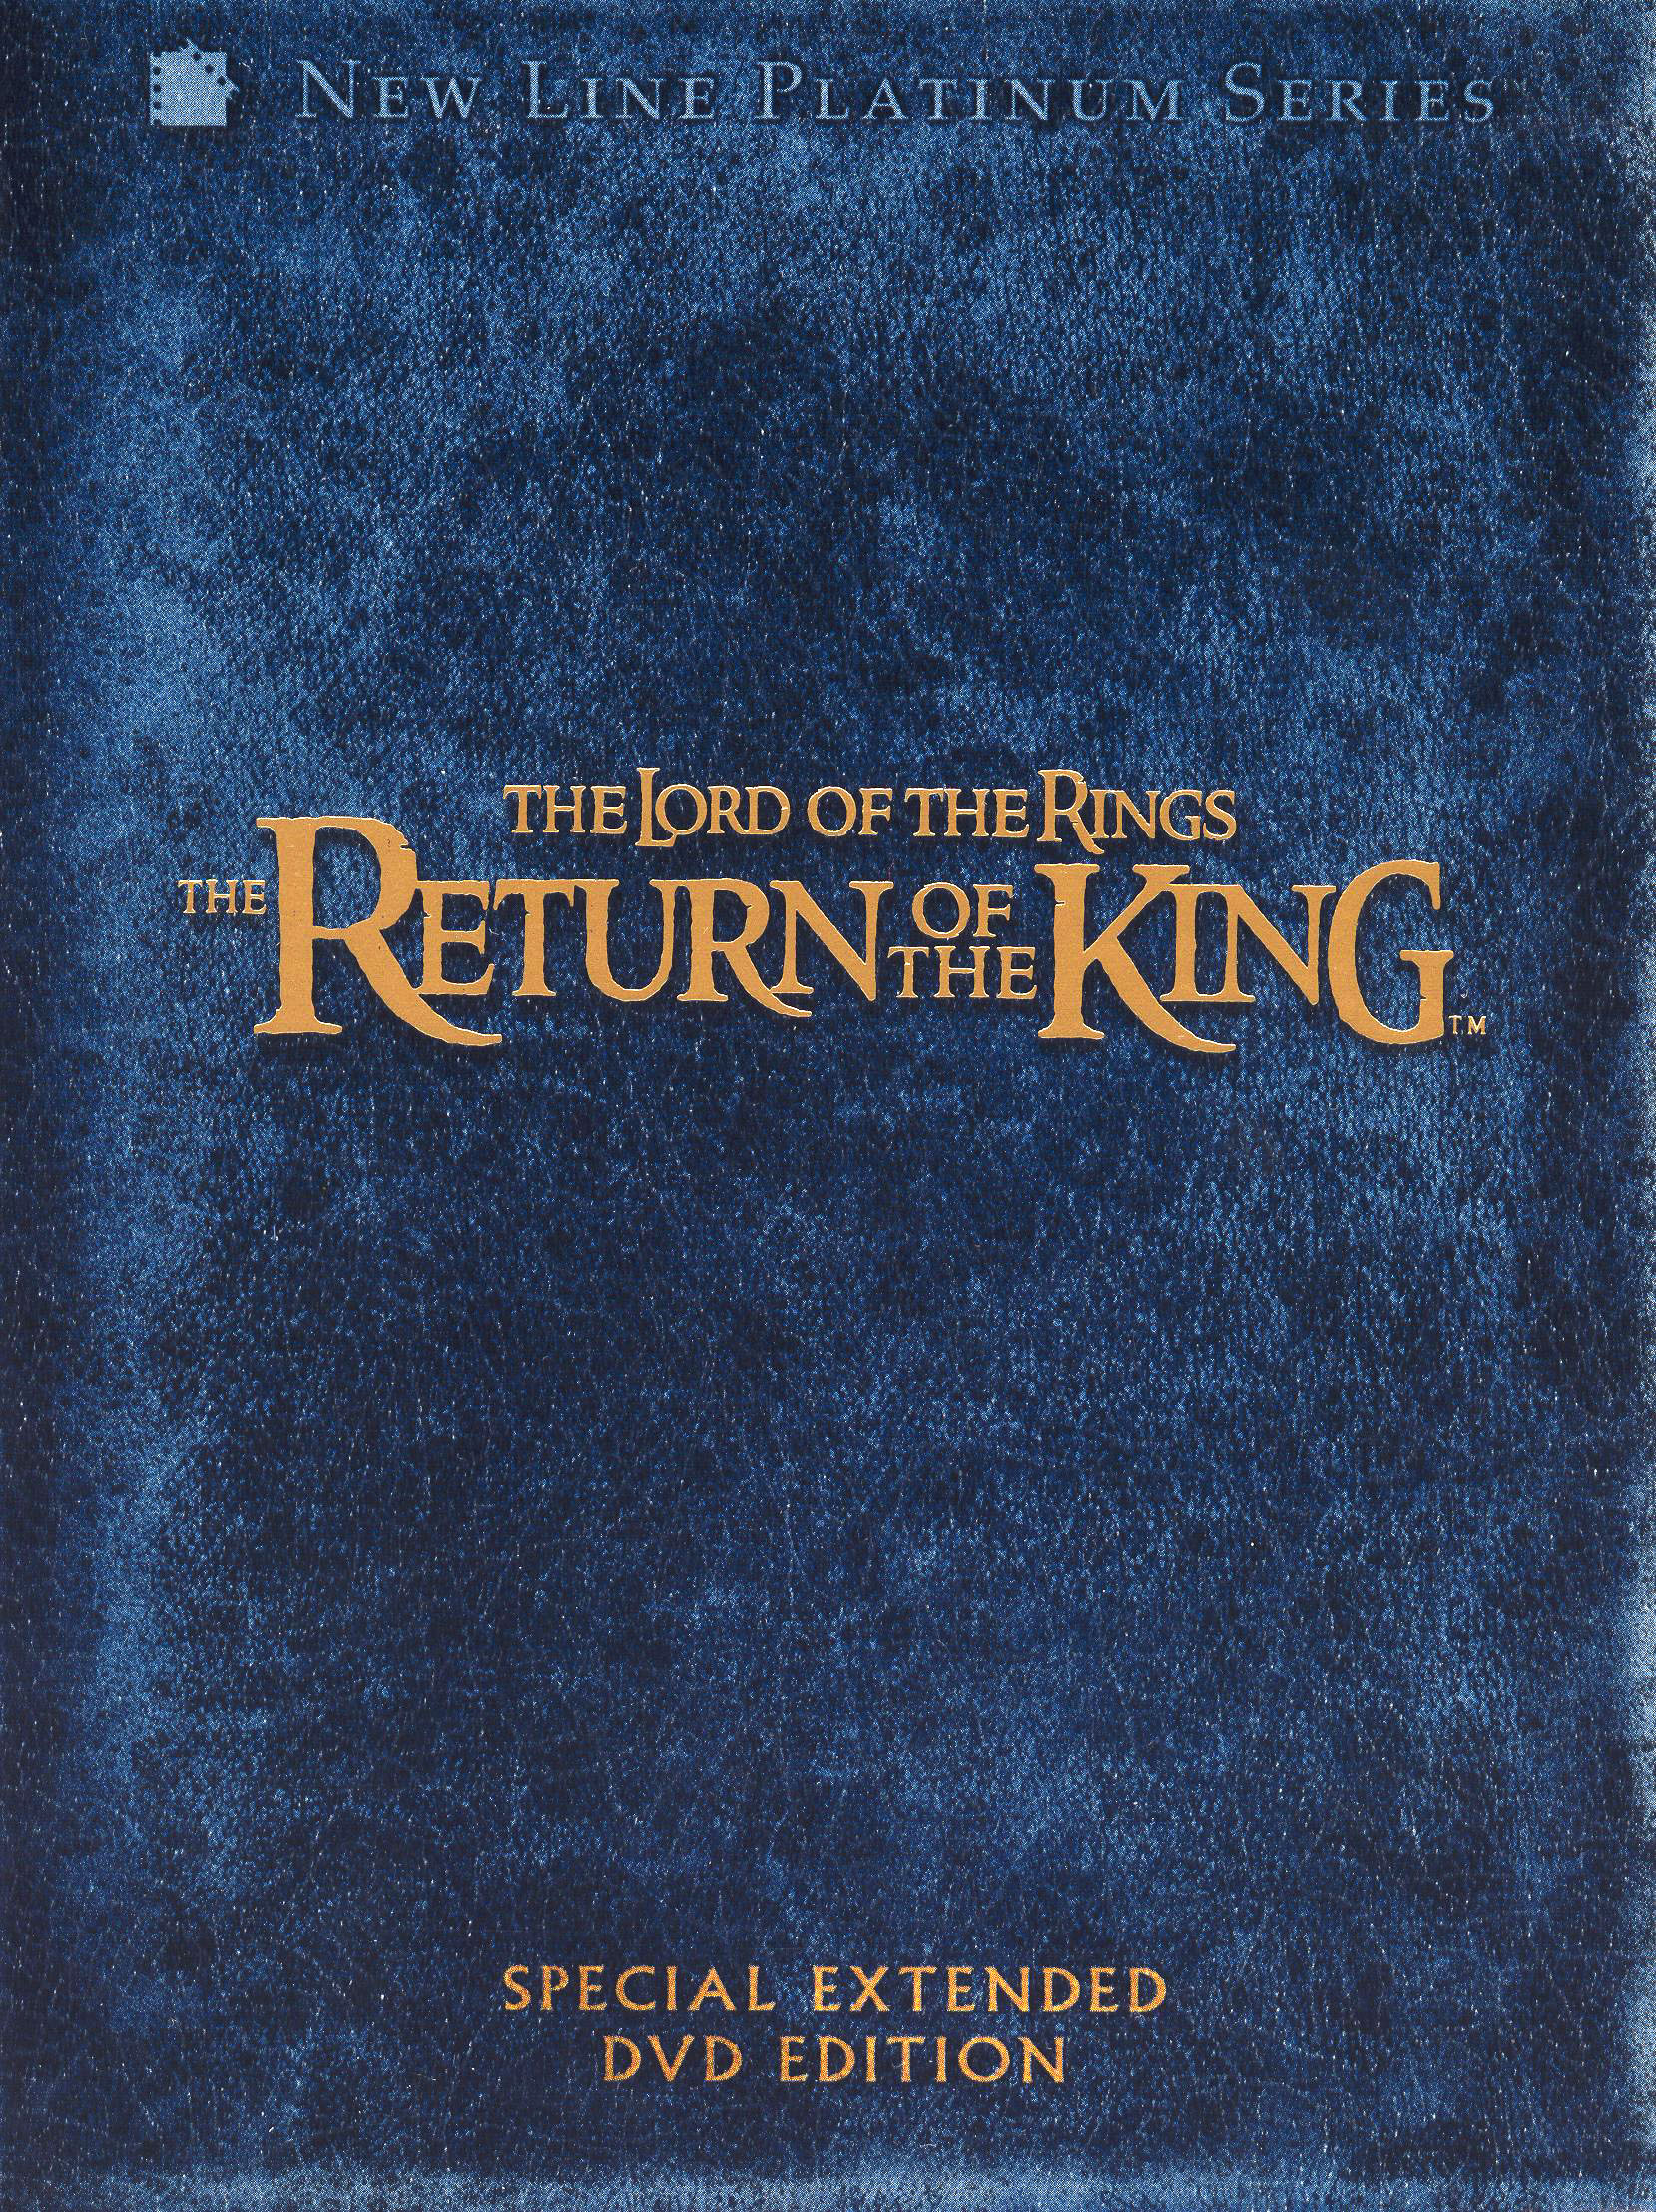 Frustratie Correlaat Spektakel The Lord of the Rings: The Return of the King [Extended Edition] [4 Discs]  [DVD] [2003] - Best Buy